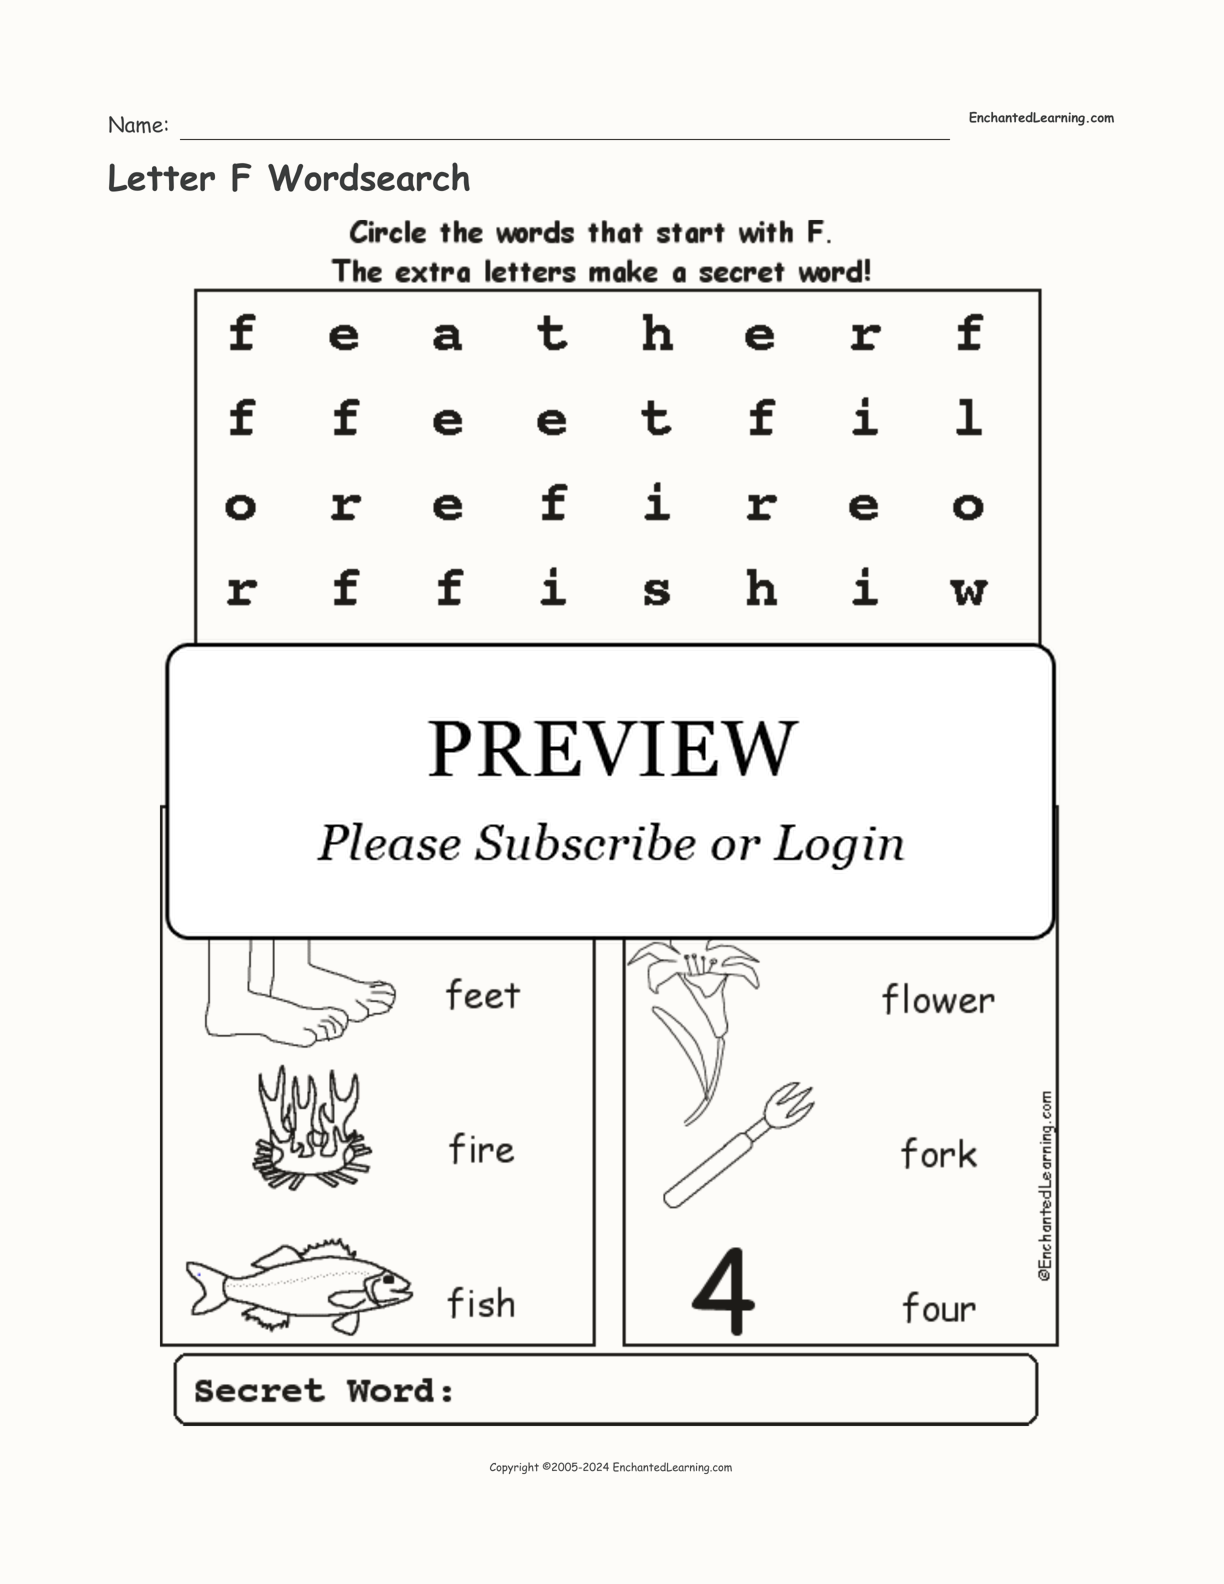 Letter F Wordsearch interactive worksheet page 1